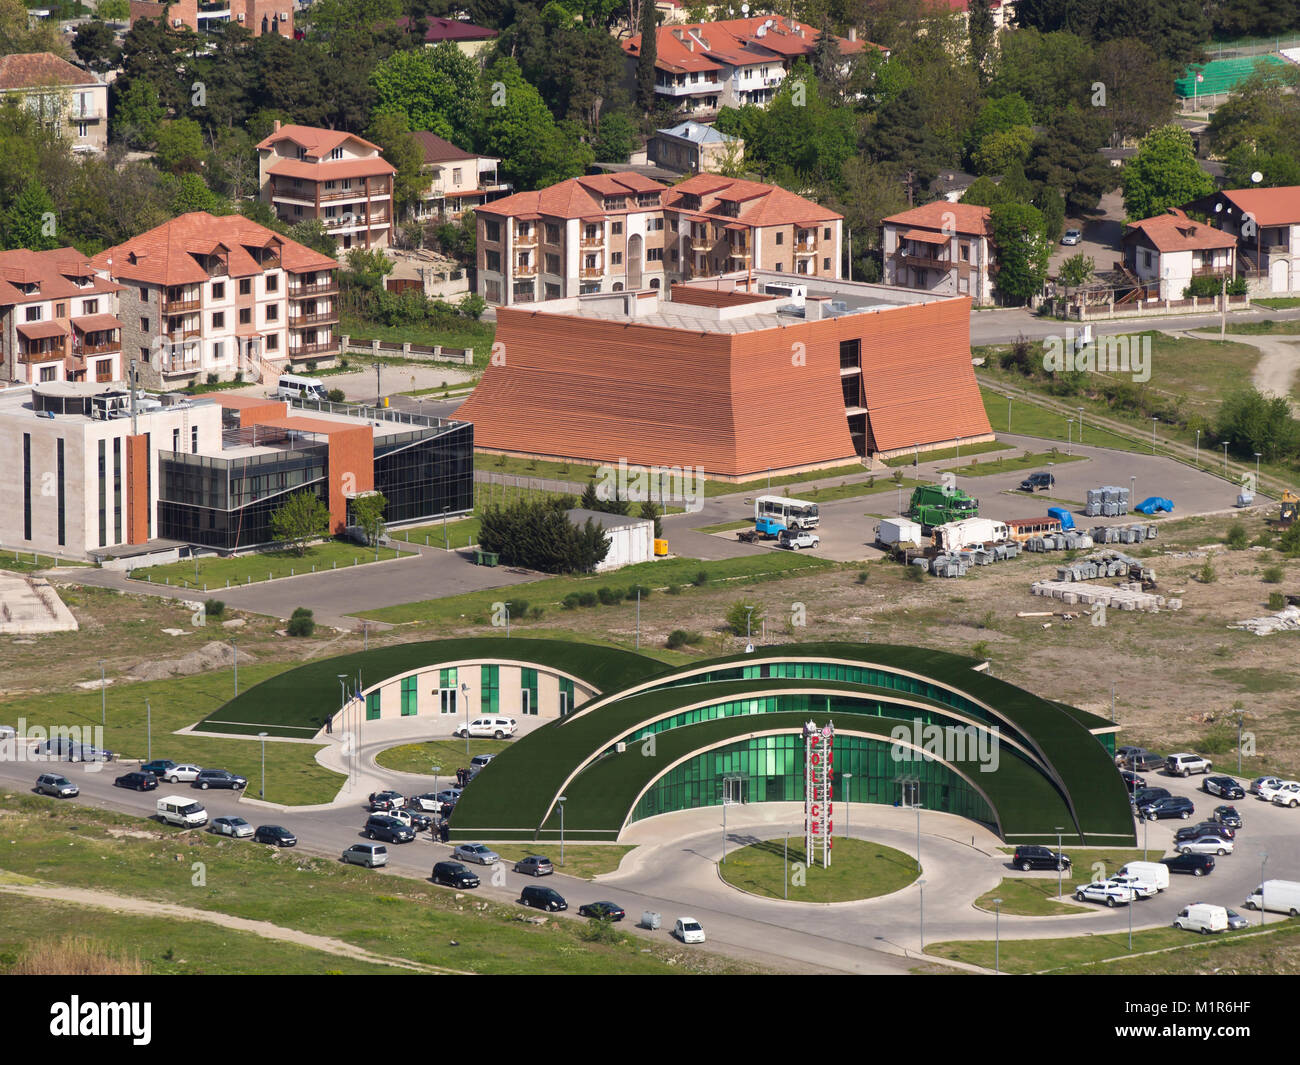 Modern architecture in Mtskheta Georgia, police station in green glass to highlight transparency, local government building behind Stock Photo